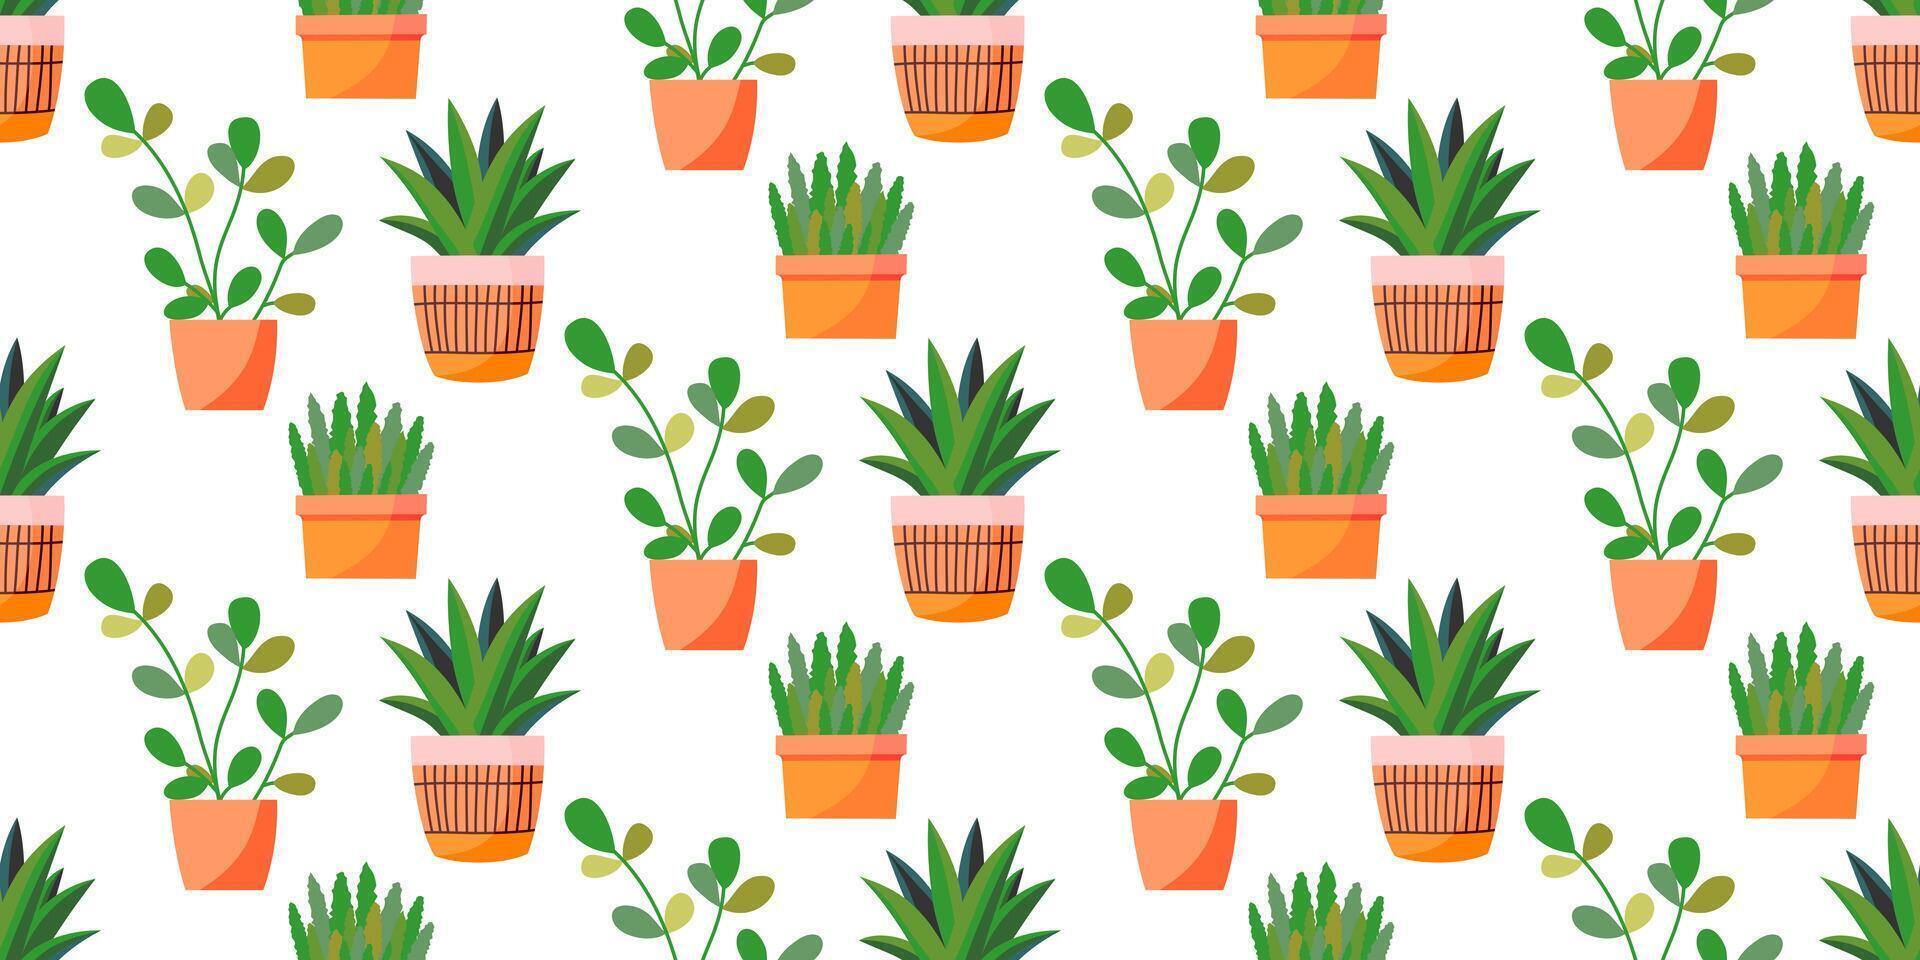 Seamless background with decorative indoor plants. Colorful illustration background with a variety of potted indoor plants. vector